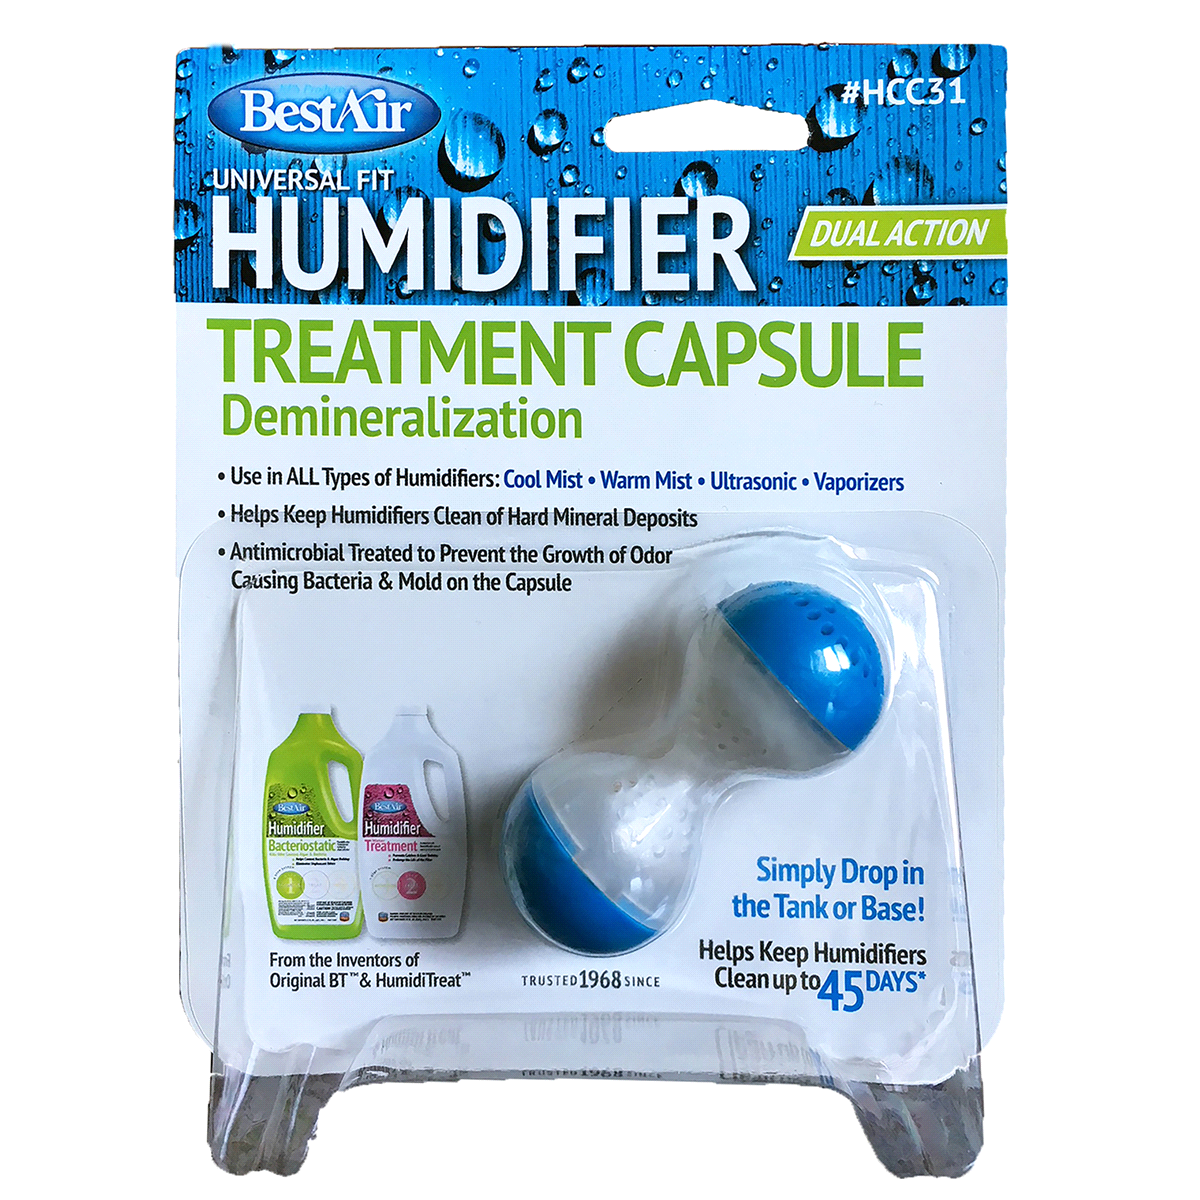 slide 1 of 5, Universal Fit Humidifier Demineralization Capsule, HCC31, 1 ct